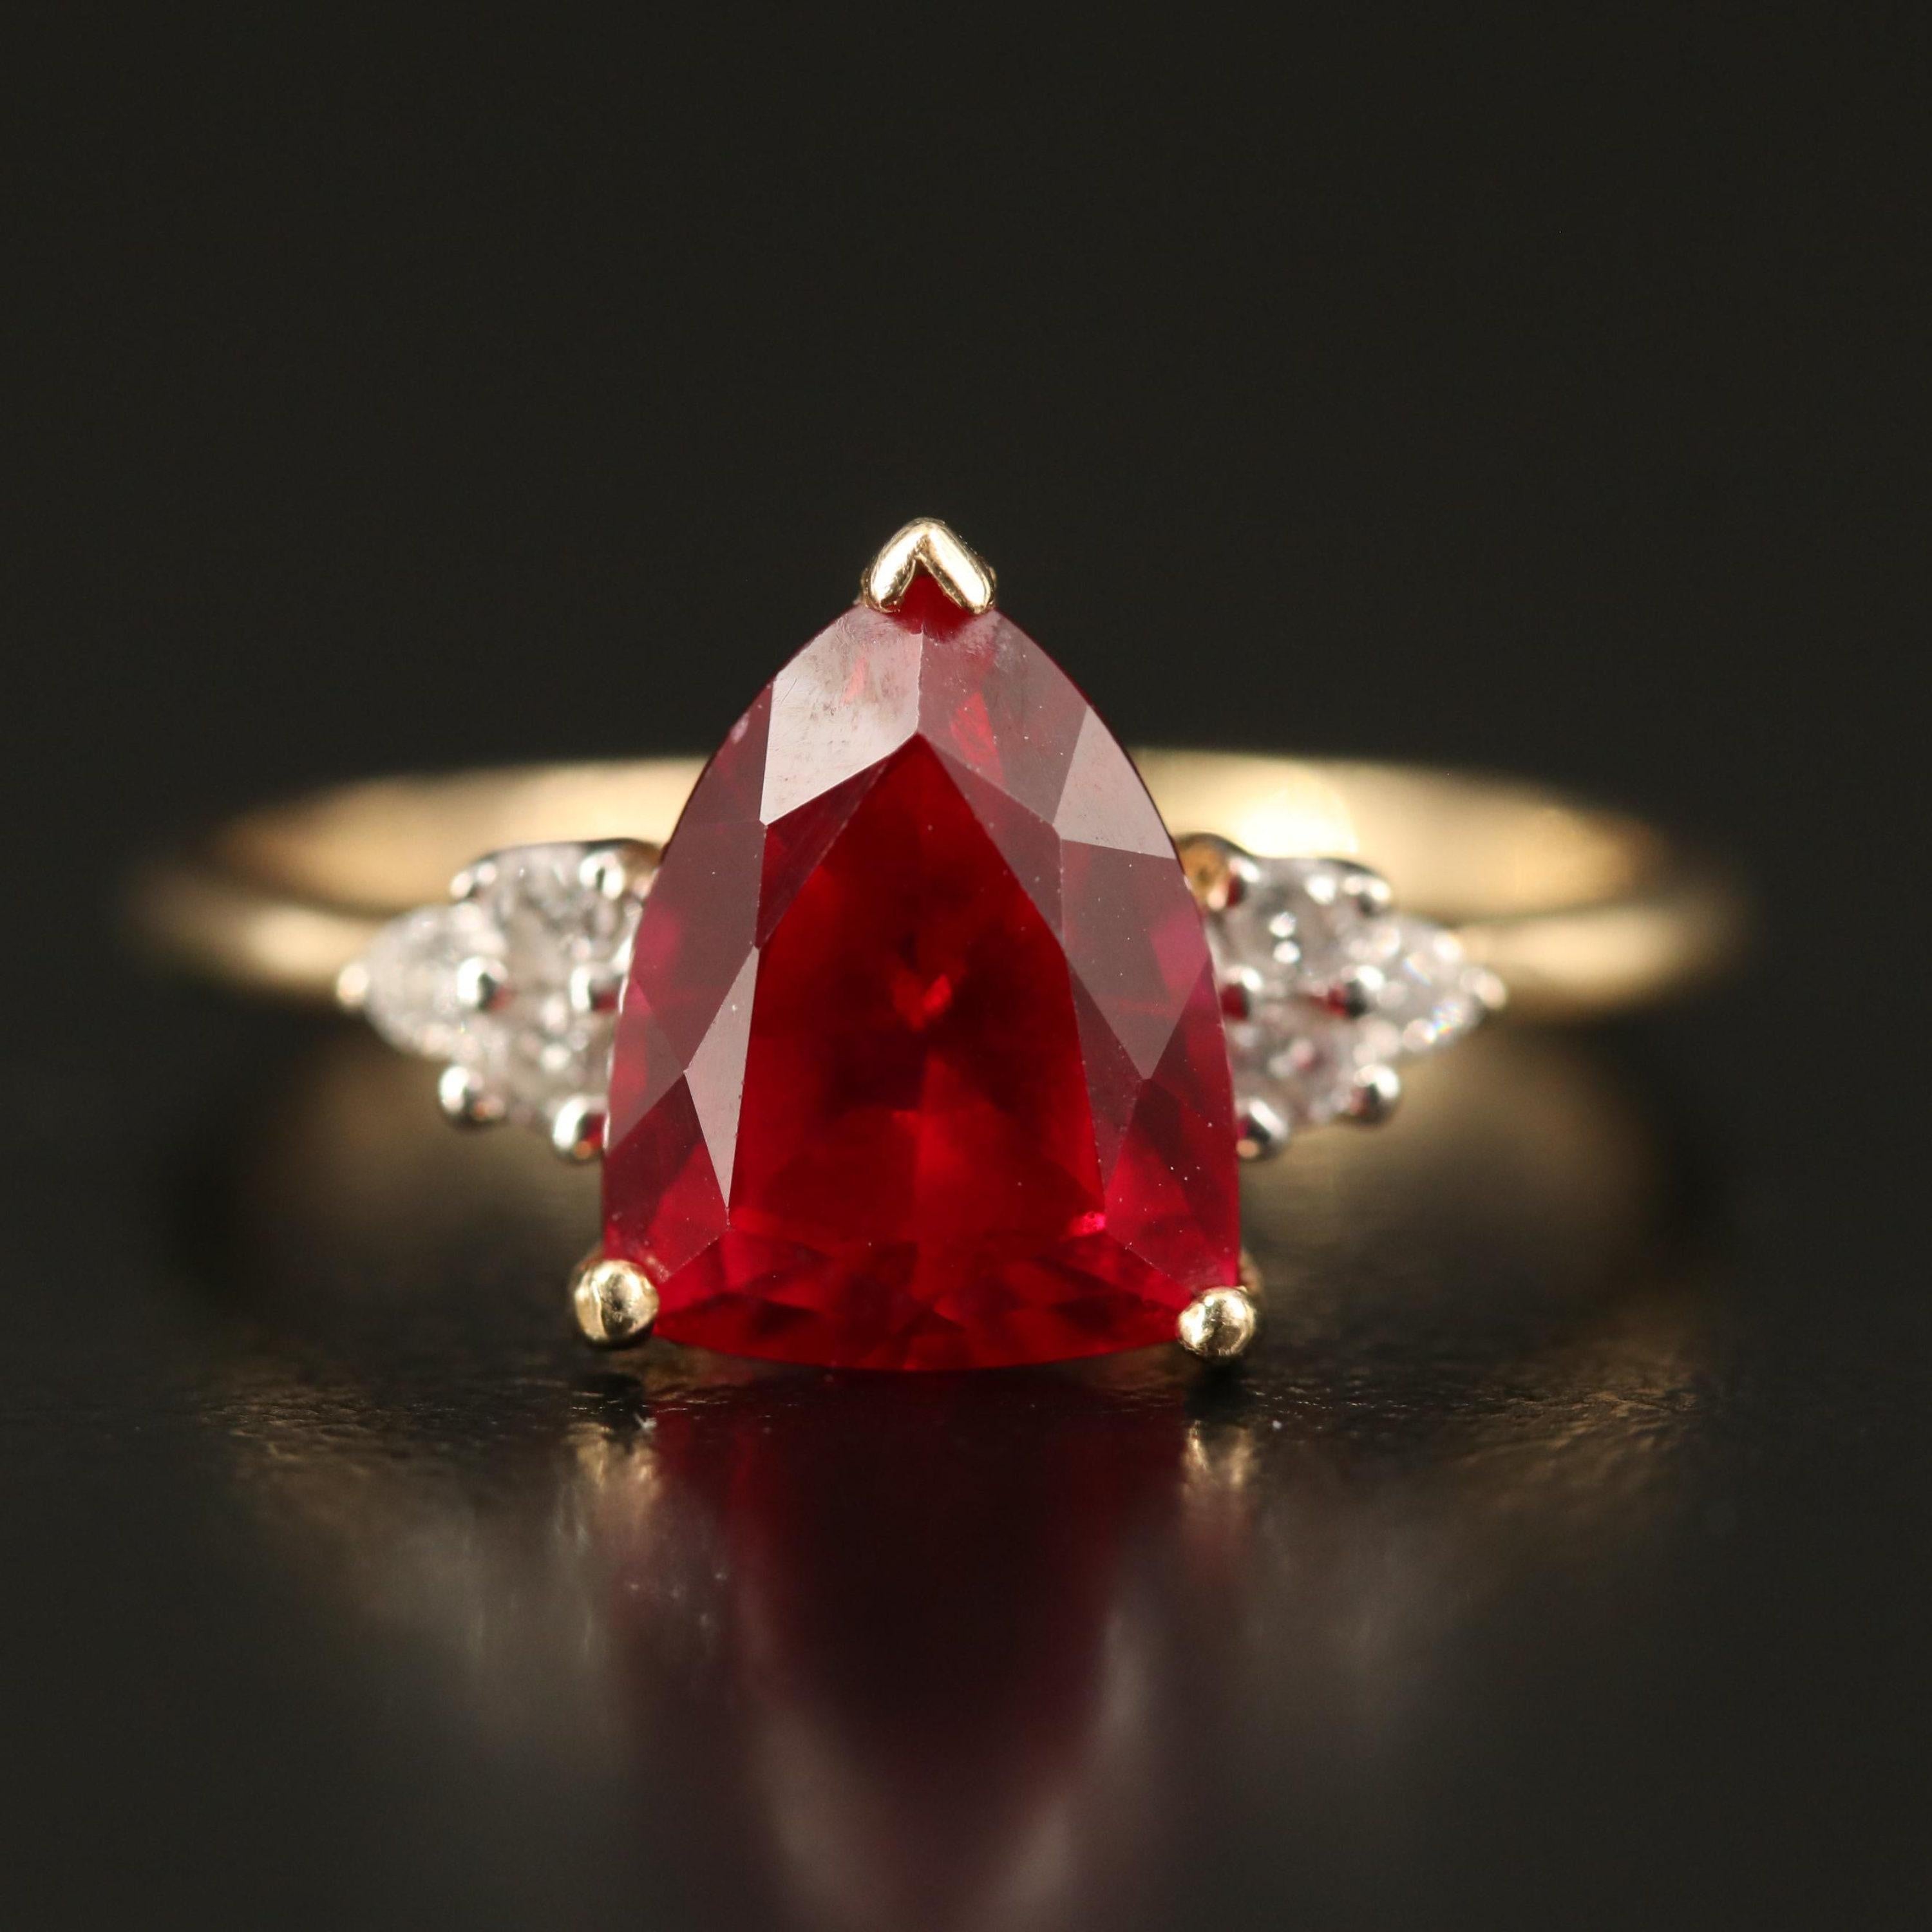 For Sale:  2 Carat Trilliant Cut Ruby Diamond Engagement Ring Antique Victorian Ruby Ring 7